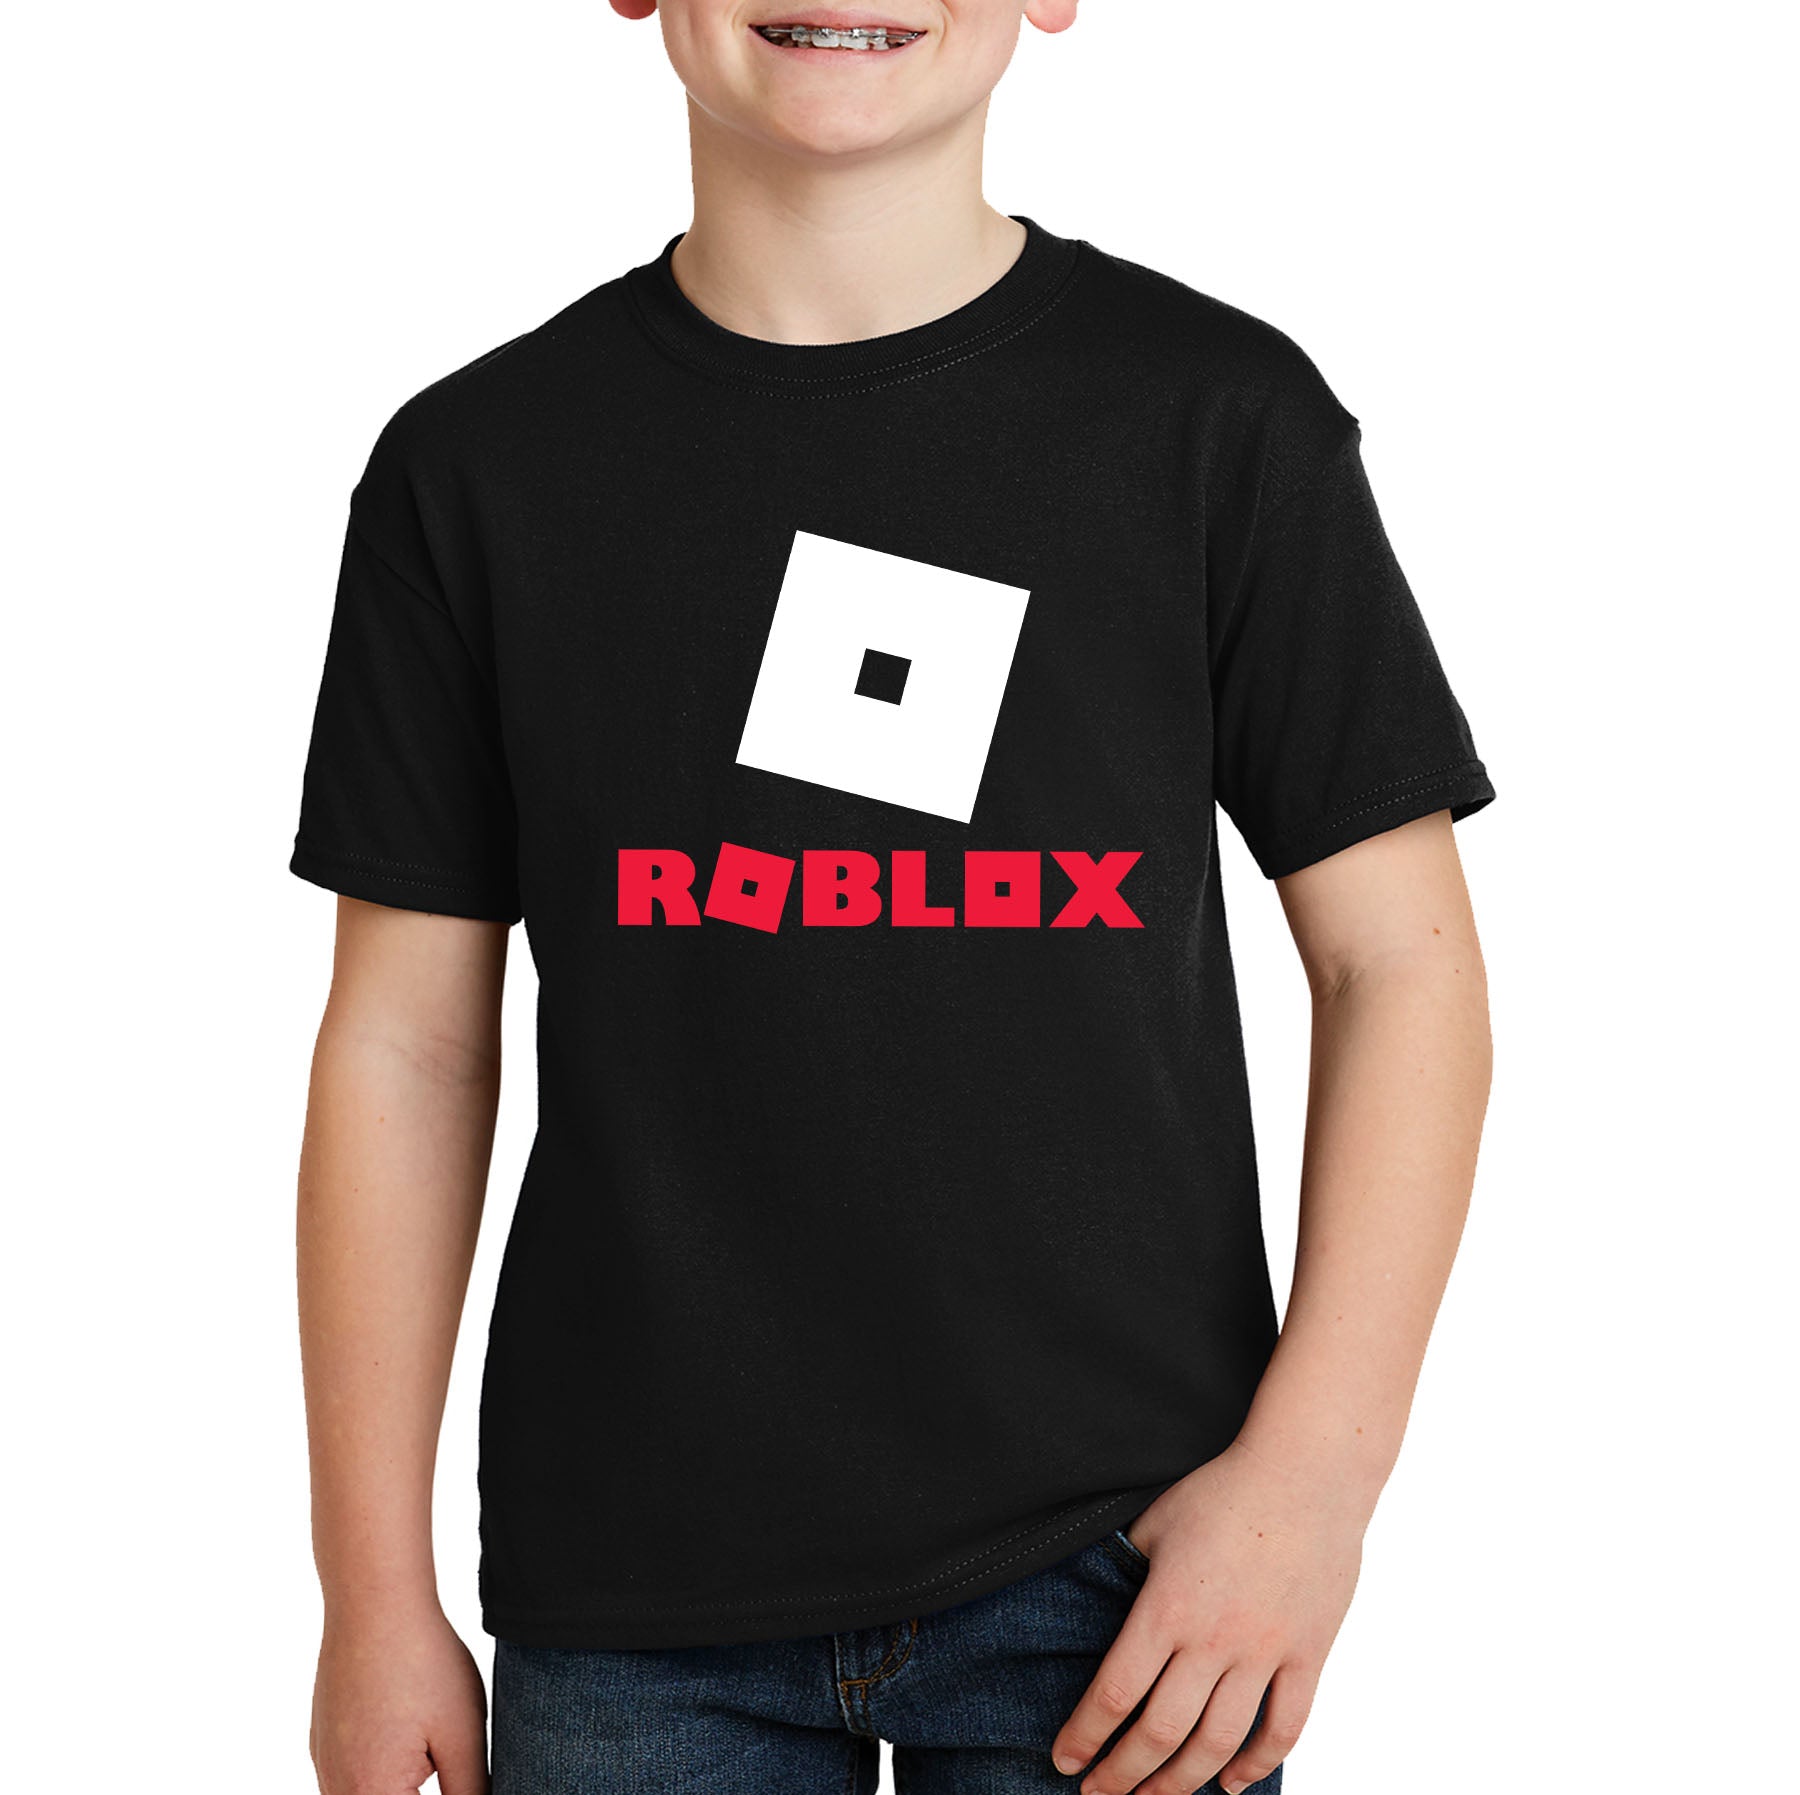 Roblox How To Make T Shirts 2019